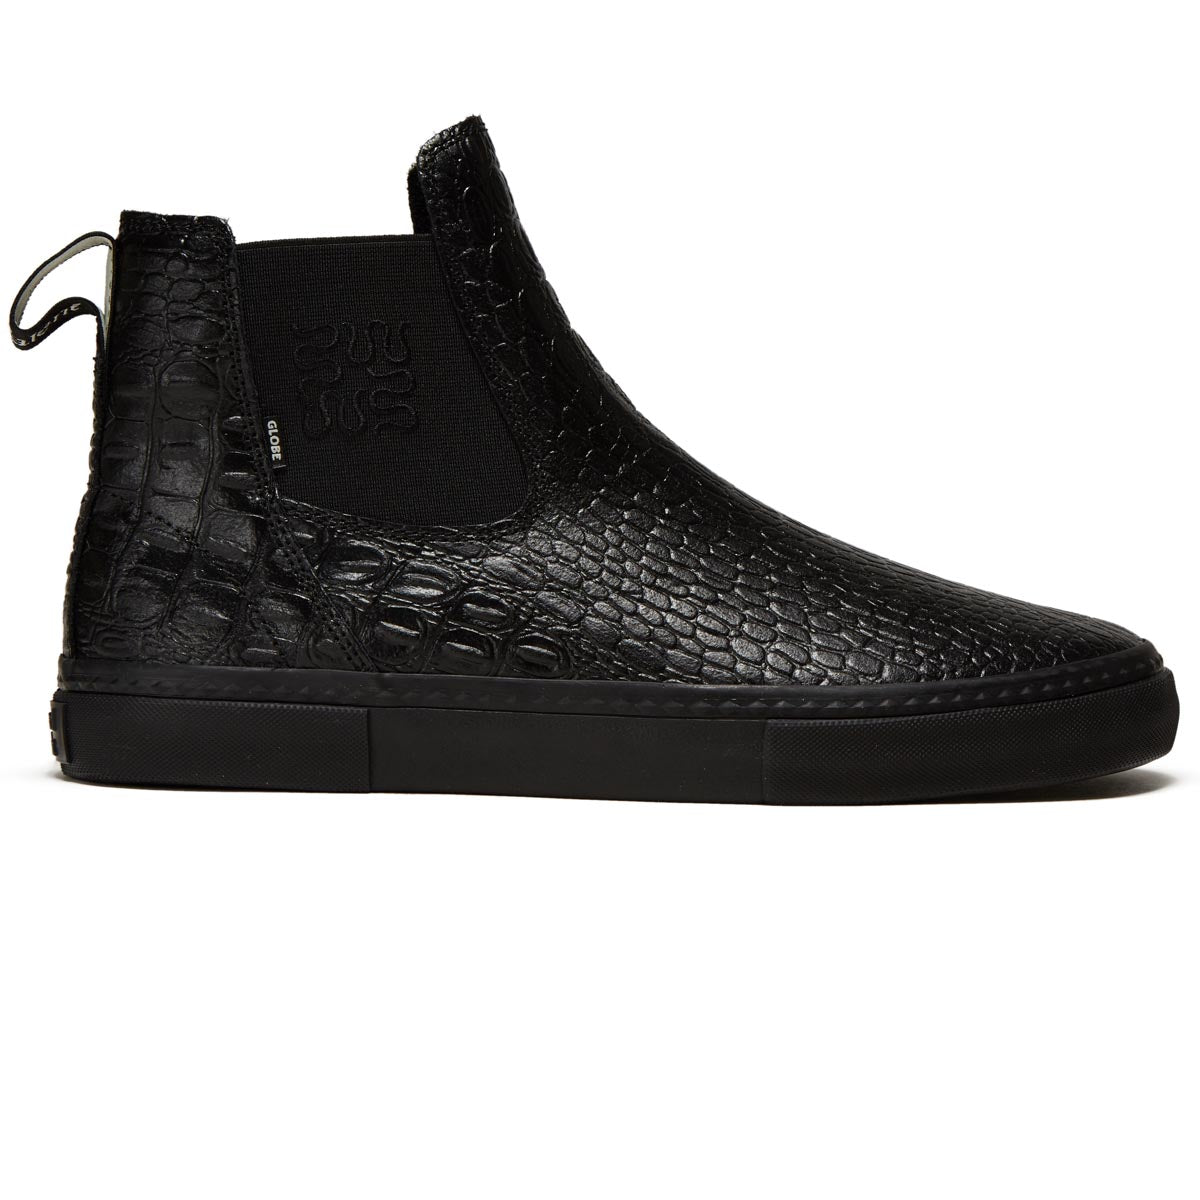 Globe Dover II Shoes - Black Croc/Wasted Talent image 1